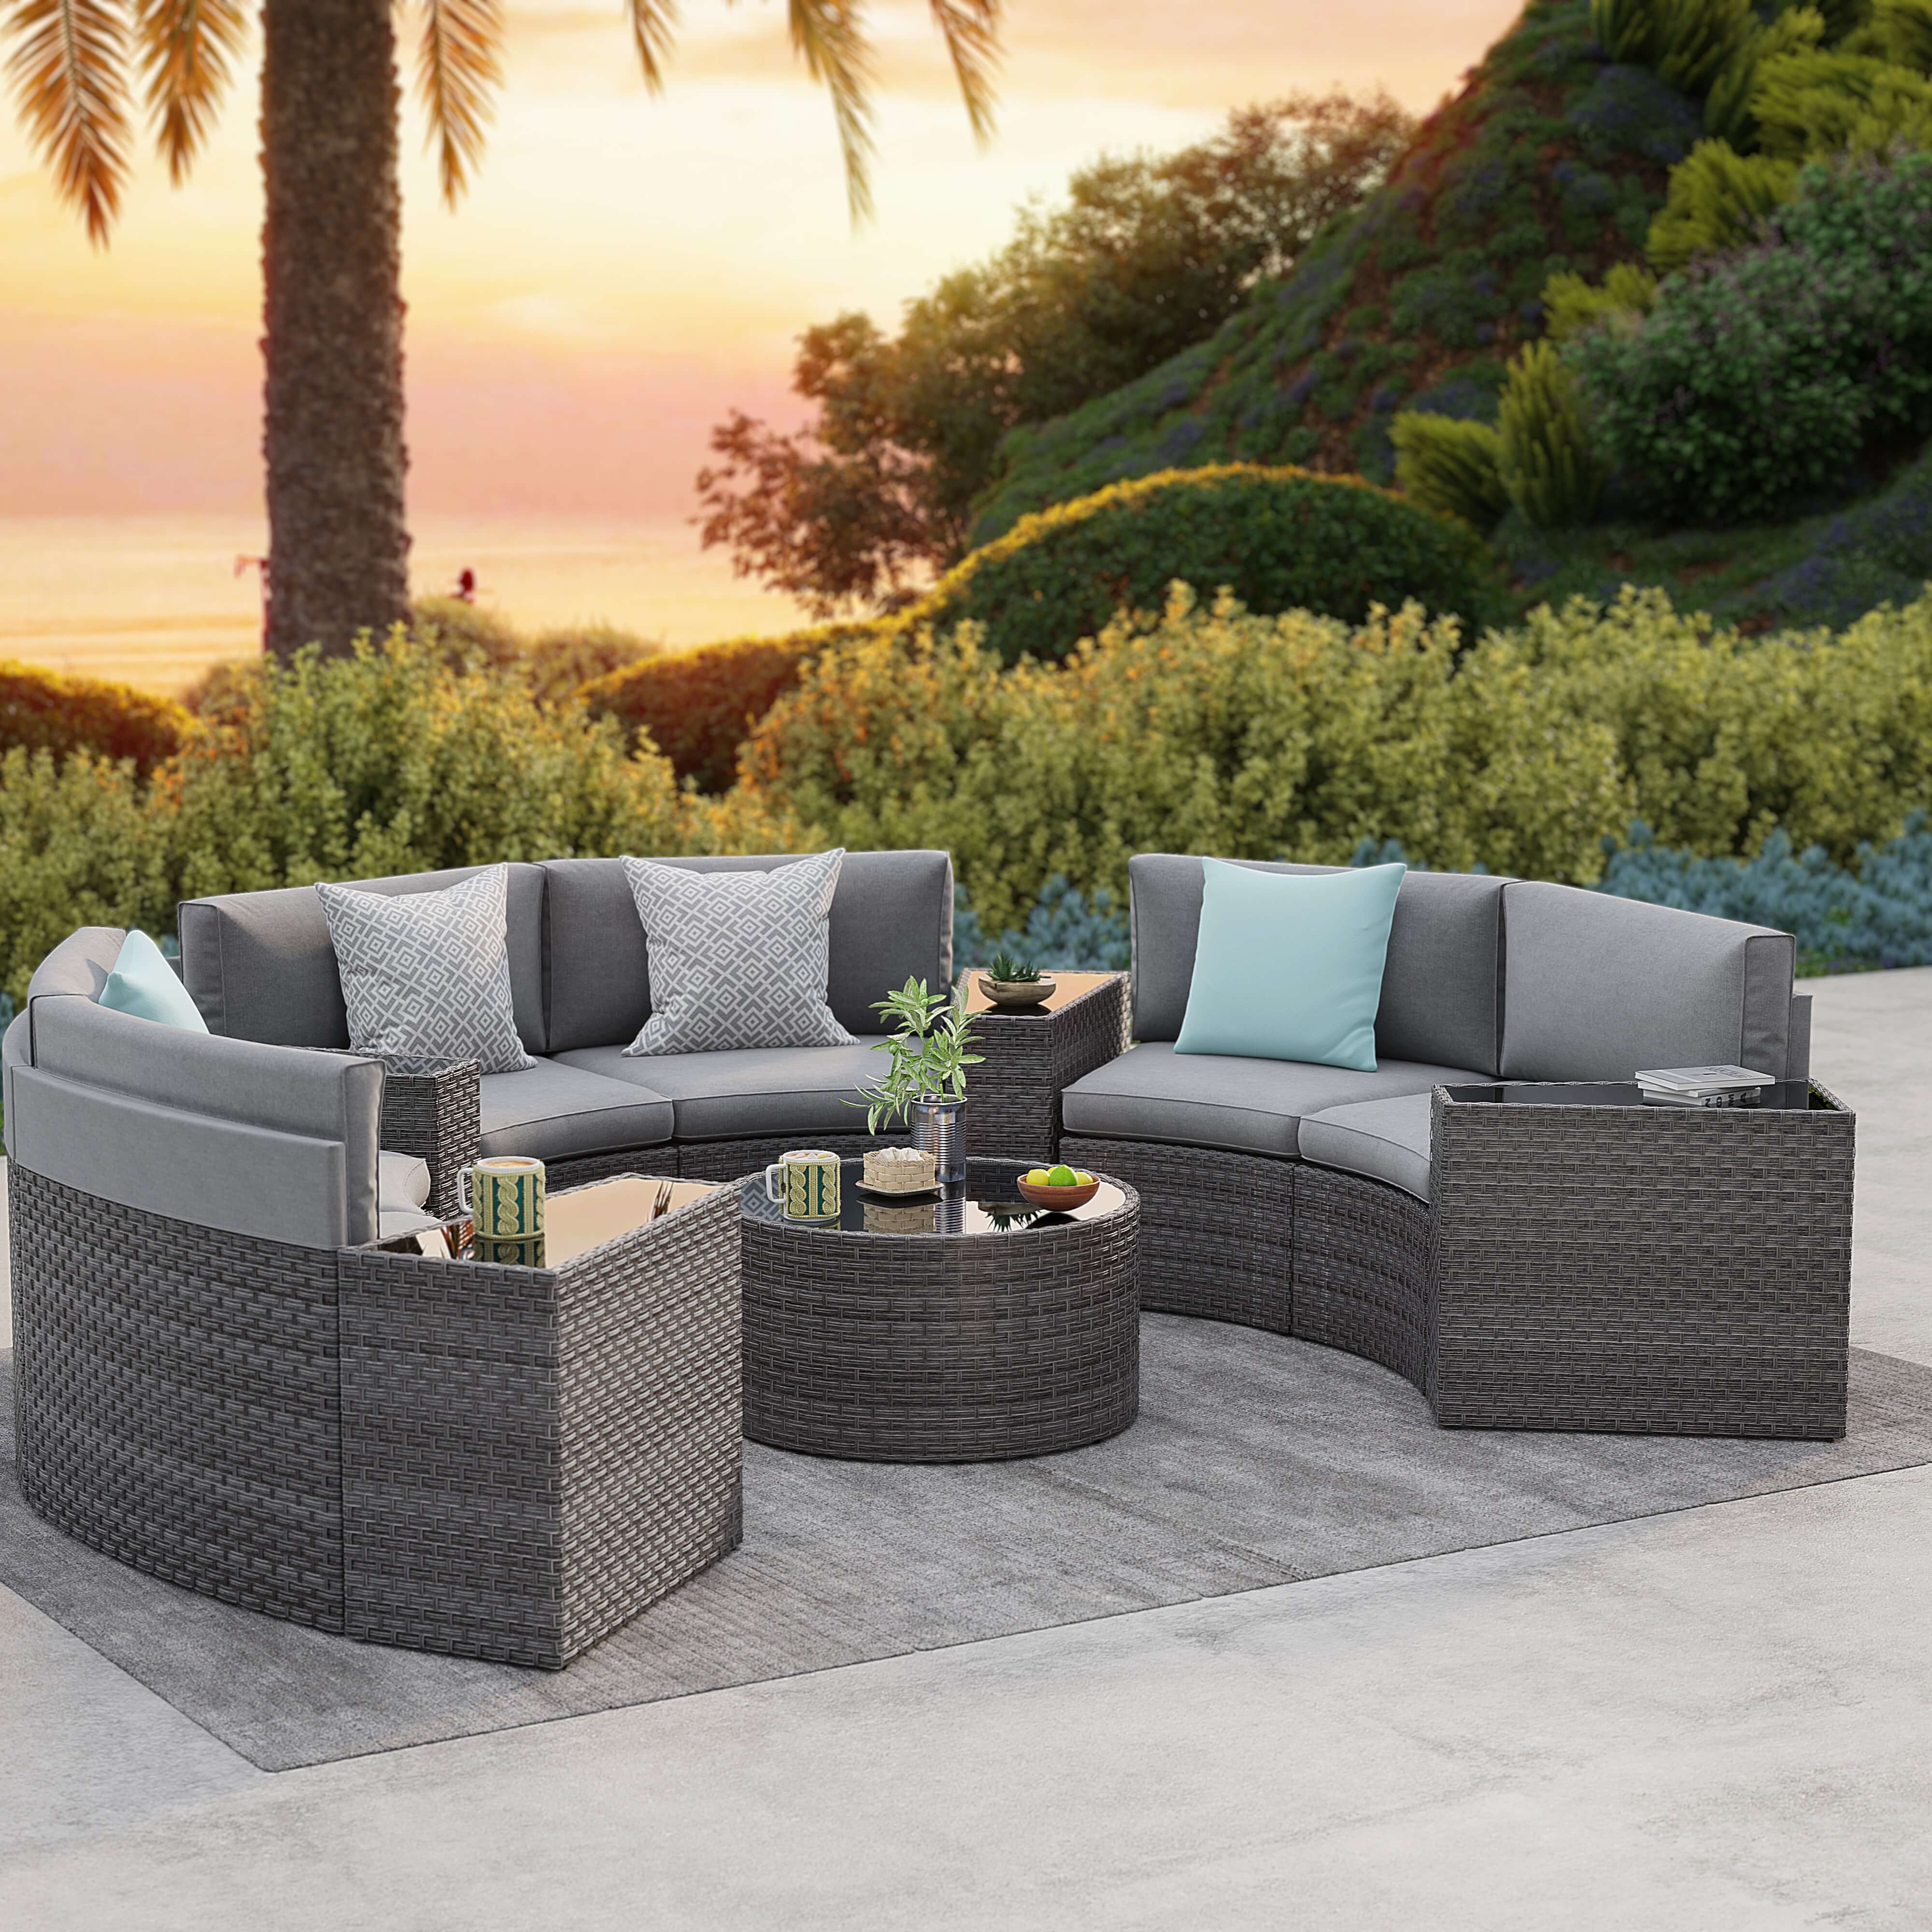 5 13 Pcs Outdoor Curved Sofas